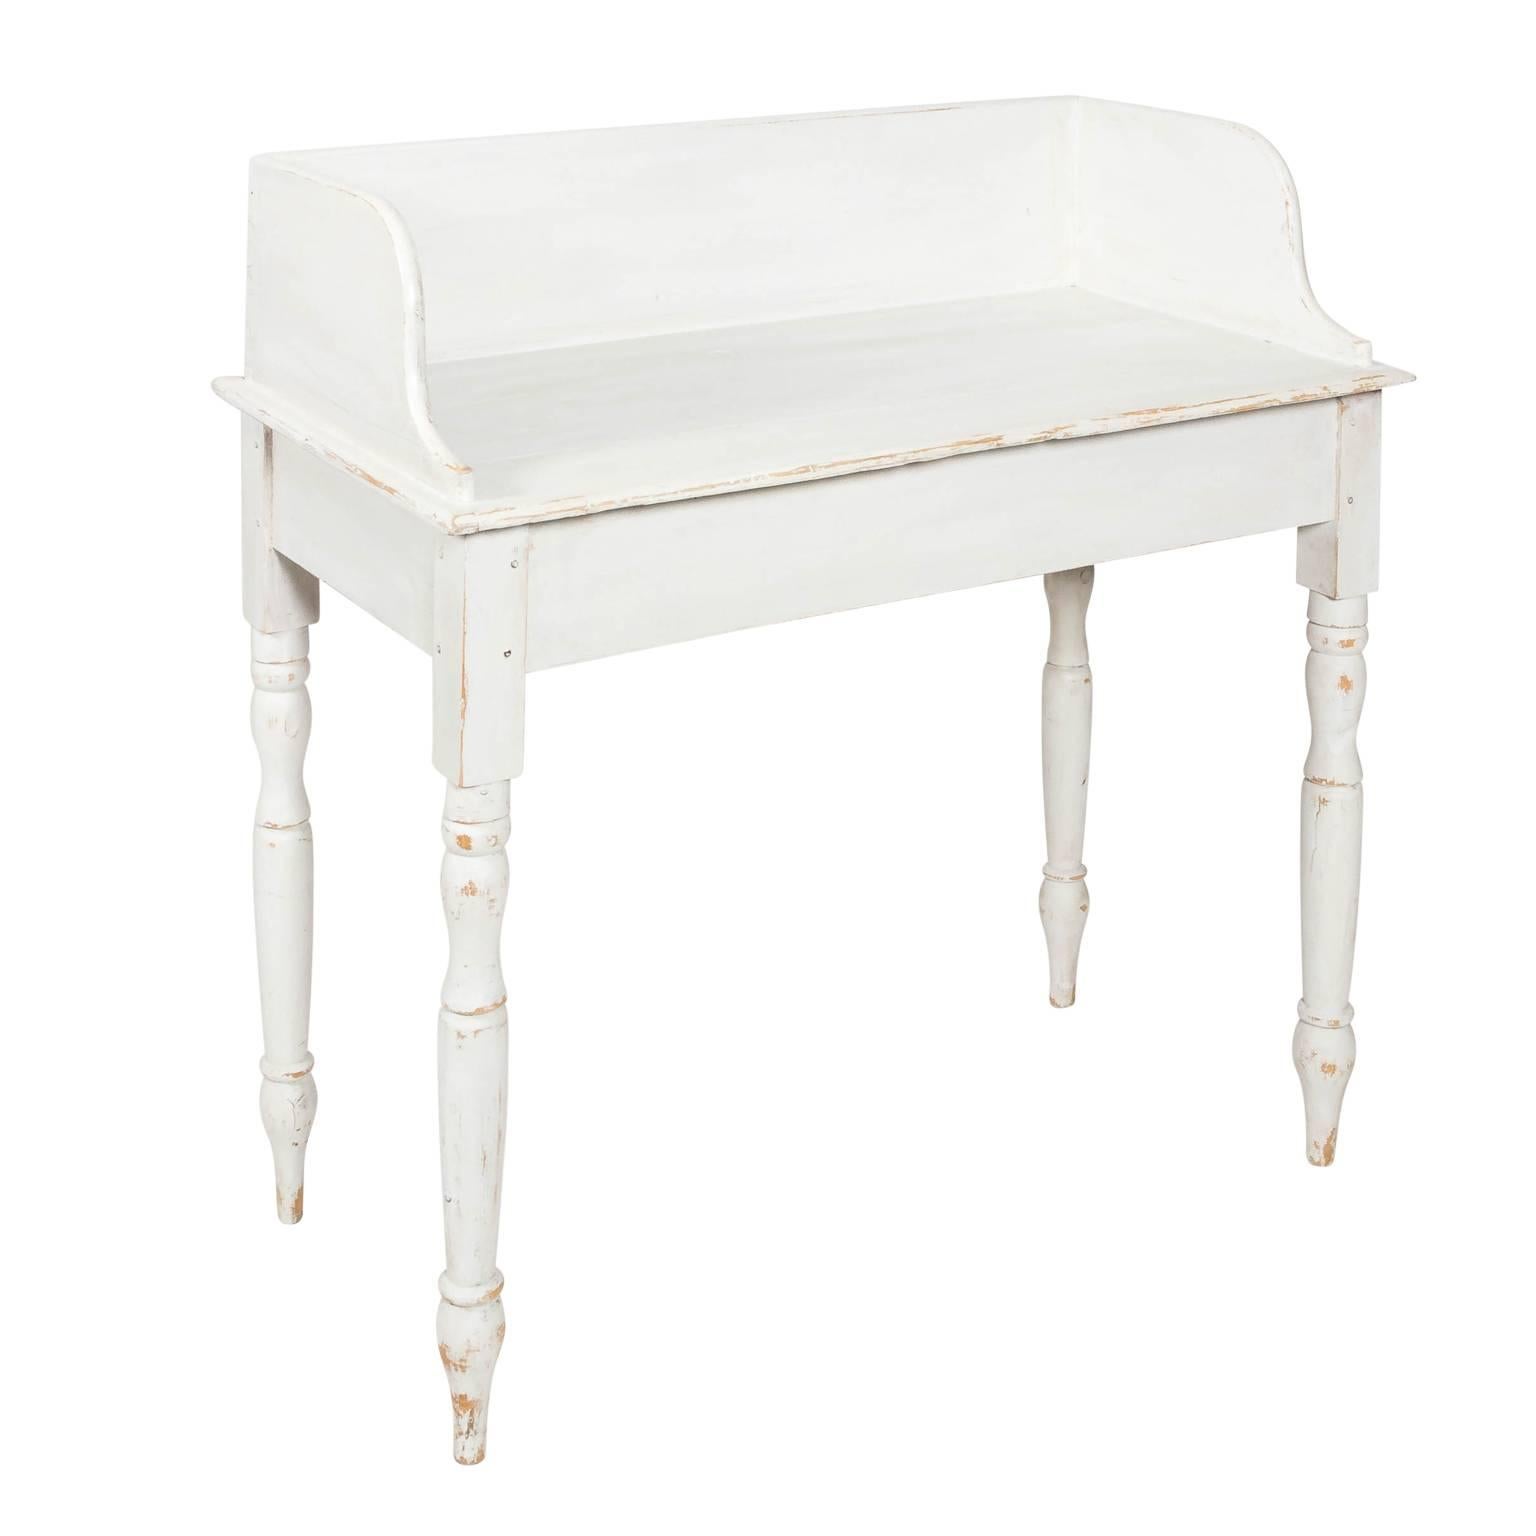 Early 19th Century American White Painted Pinewood Washstand 7